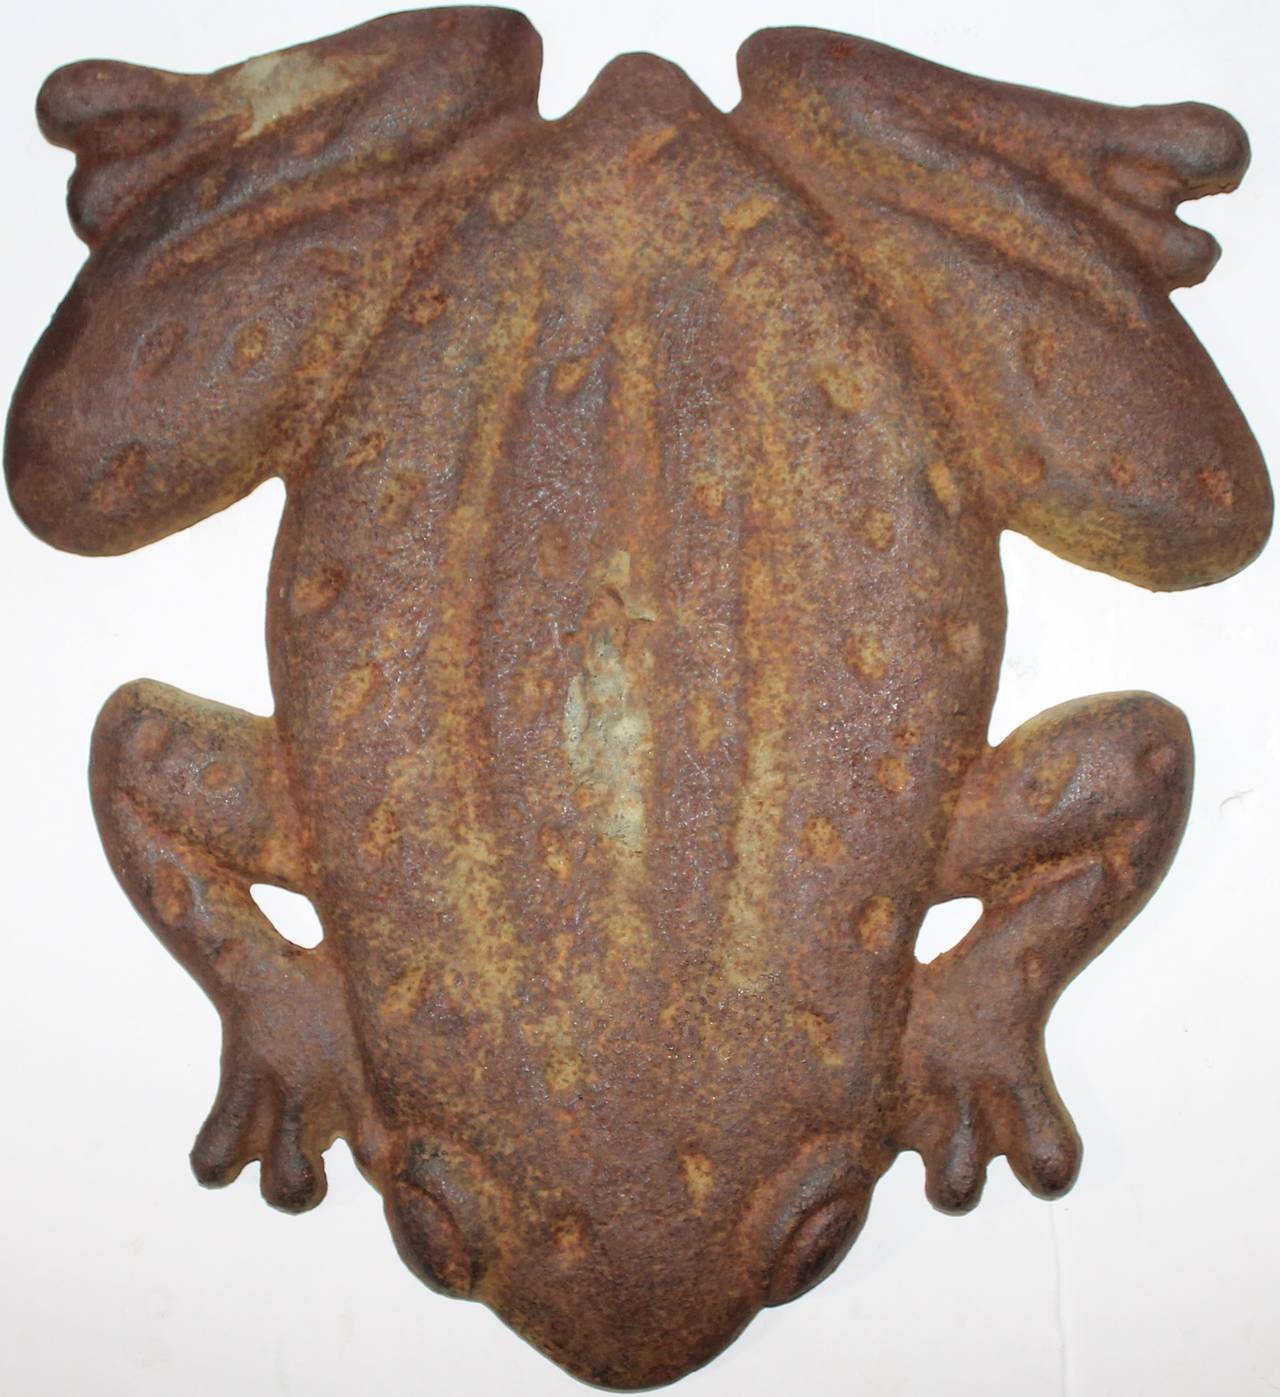 This fun large flat original worn green painted cast iron frog is in good condition with oxidation and rust surface. It is most unusual.